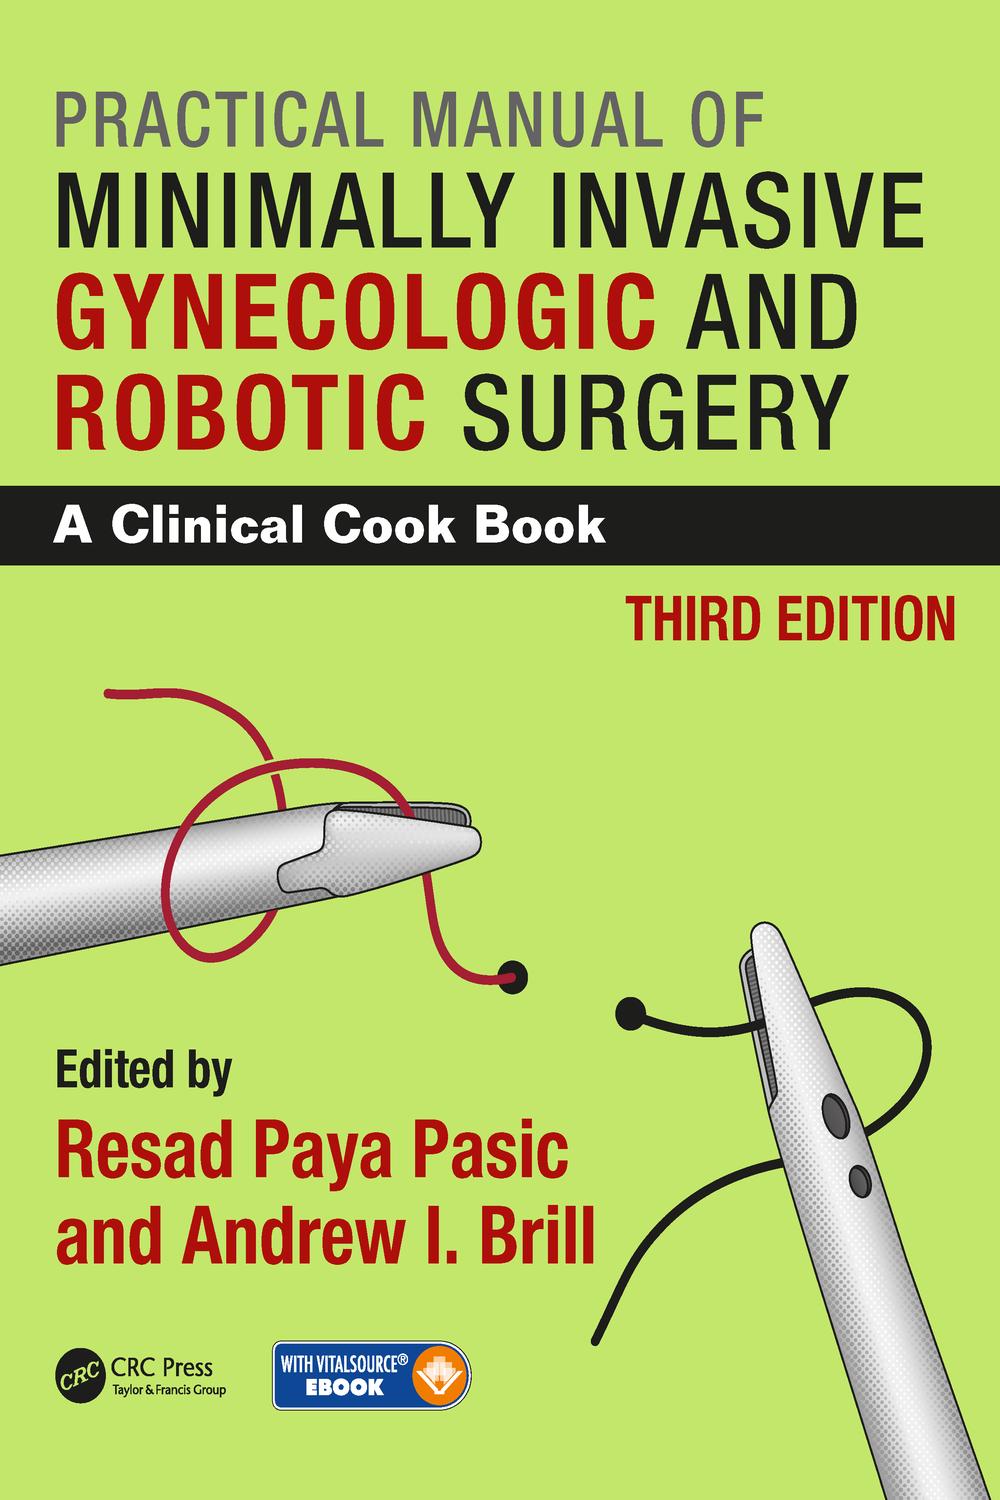 Practical Manual of Minimally Invasive Gynecologic and Robotic Surgery: A Clinical Cook Book 3rd Edition 2018